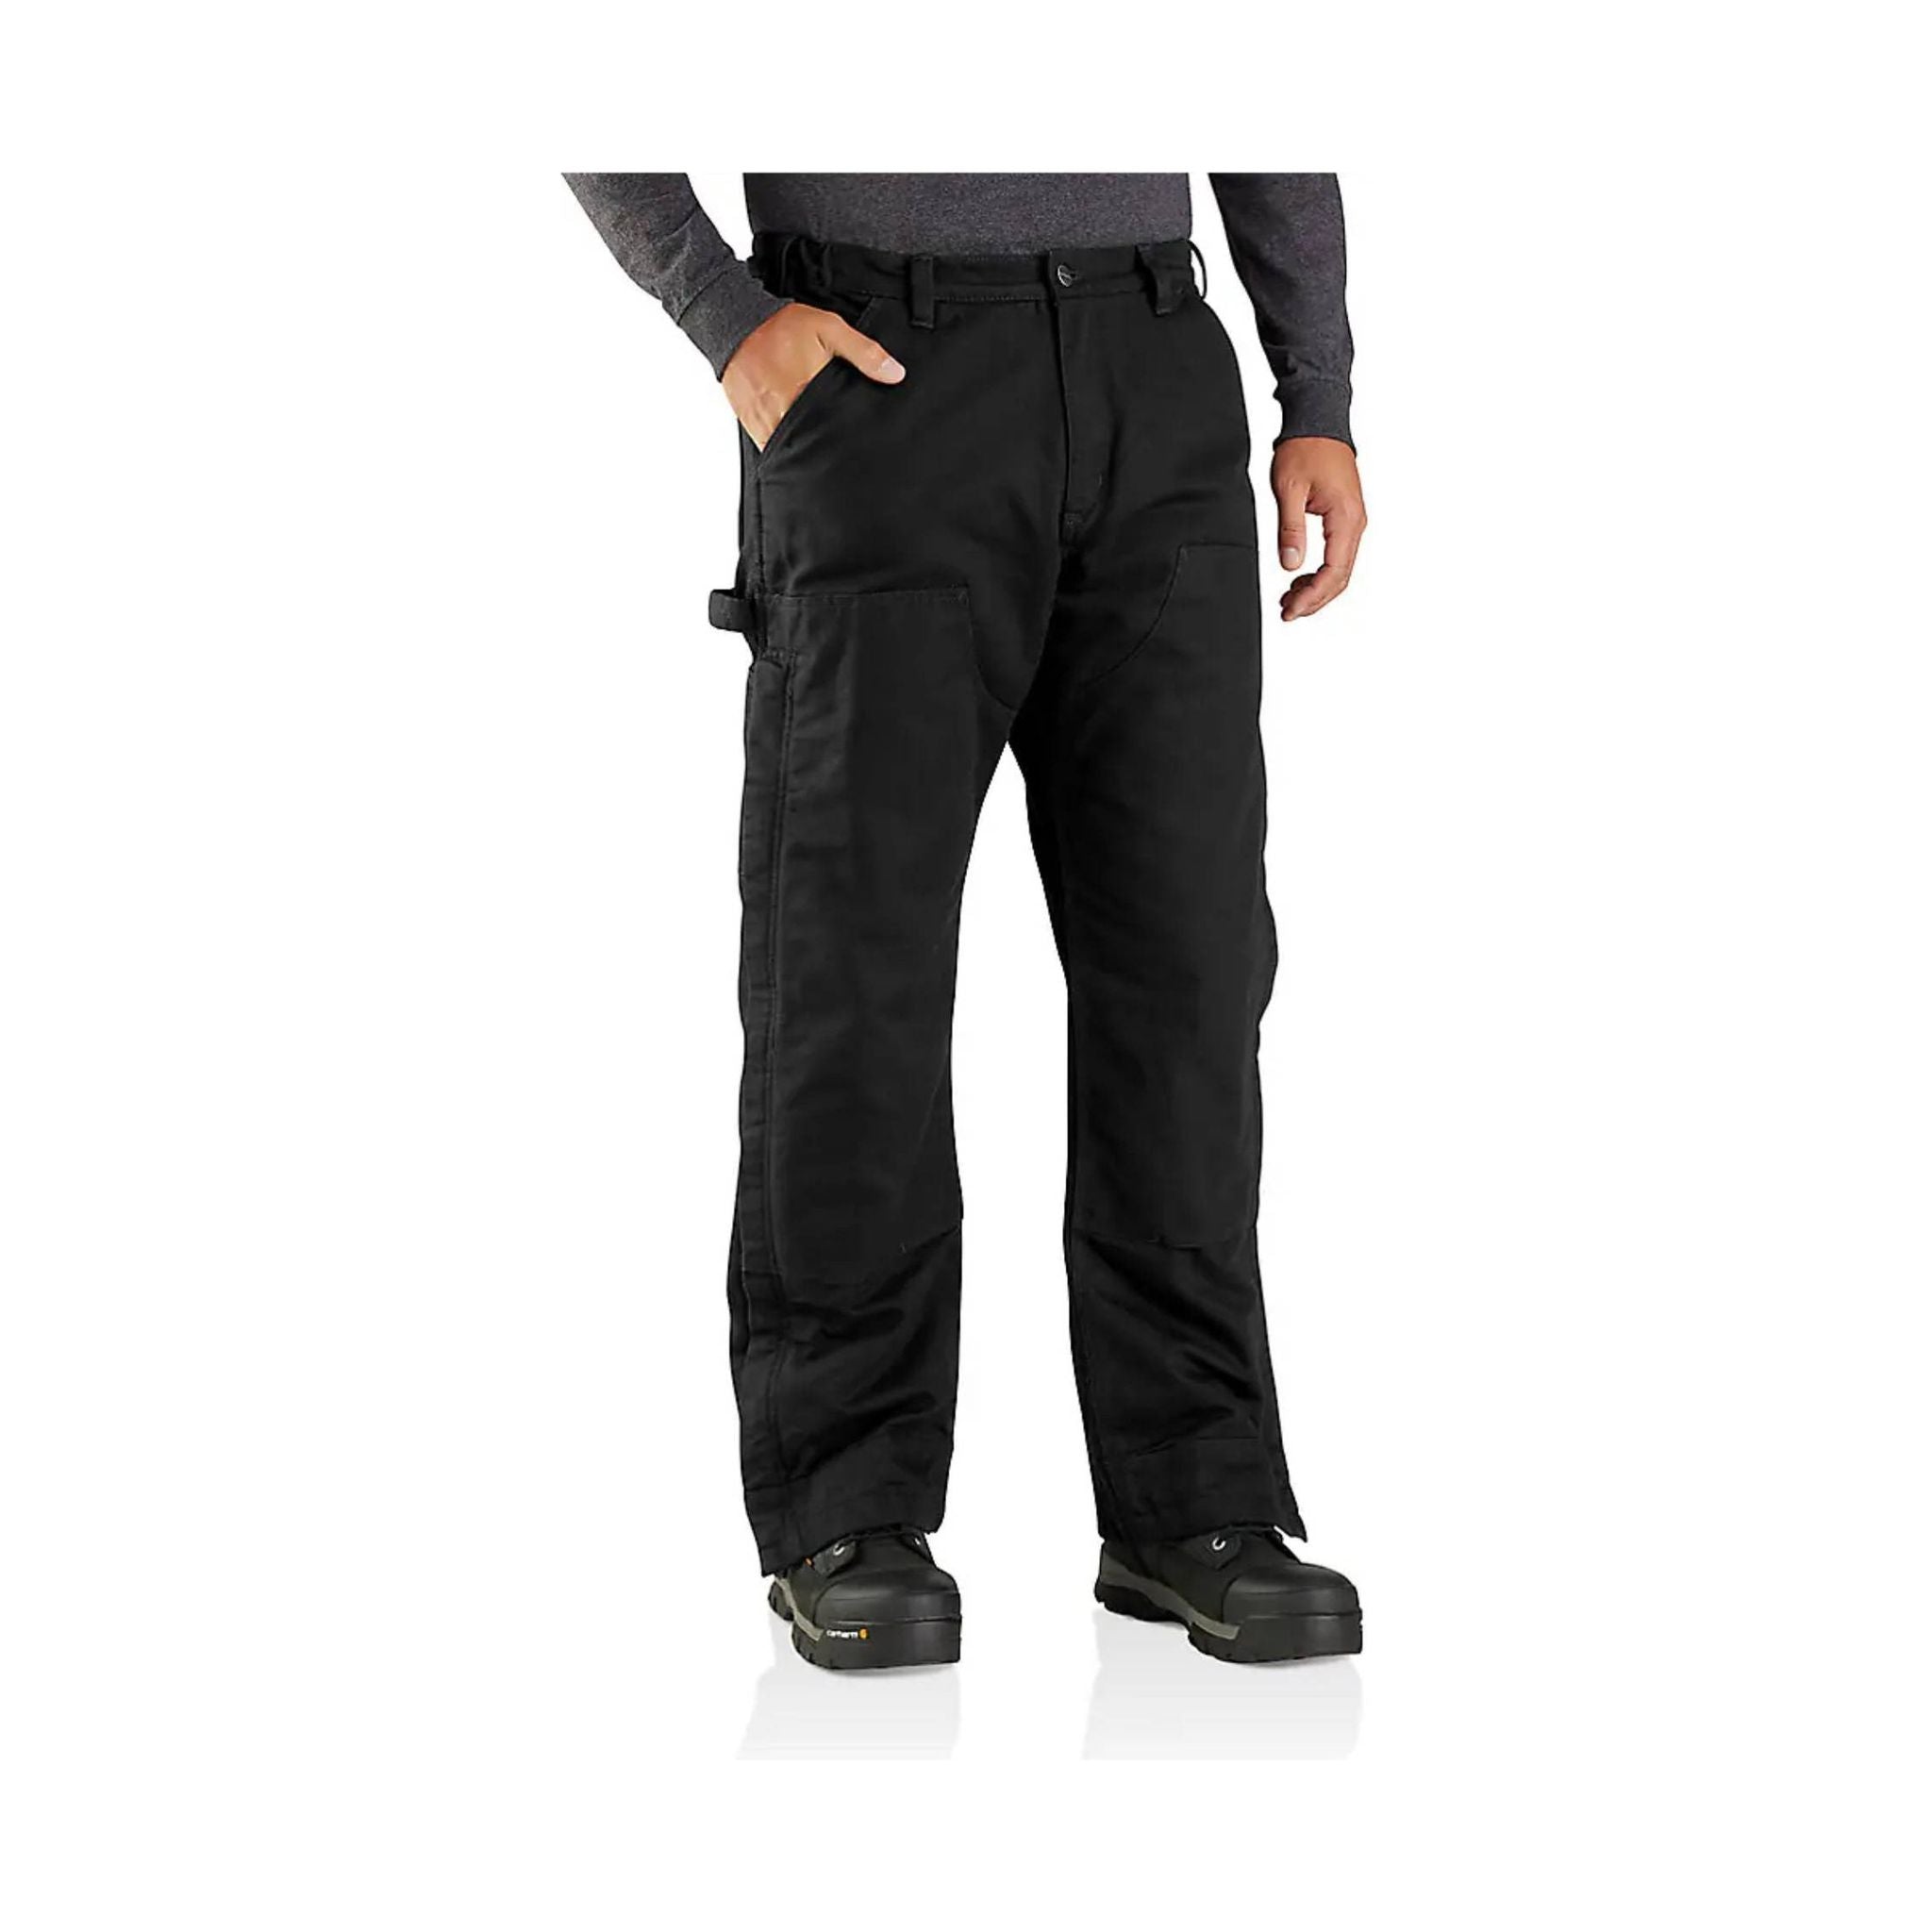 Carhartt Men's Loose Fit Washed Duck Insulated Pant - Black XL / Blk / Sht